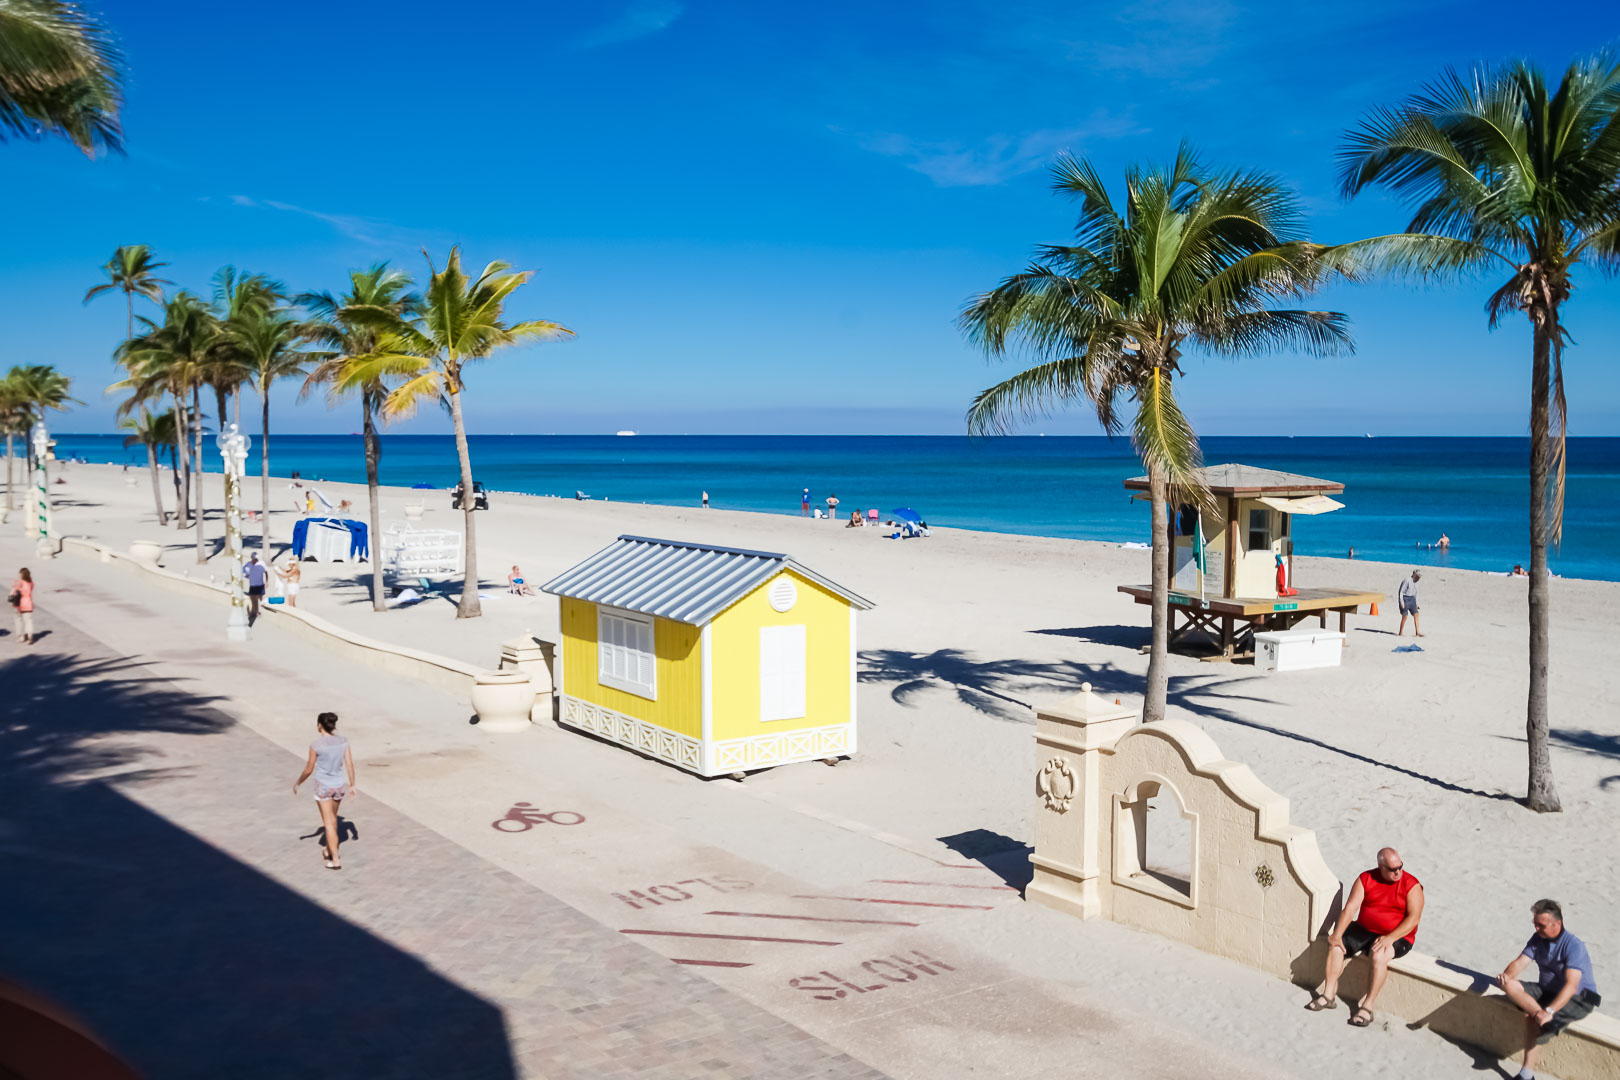 A scenic view of the beach from VRI's Hollywood Sands Resort in Hollywood, Florida.